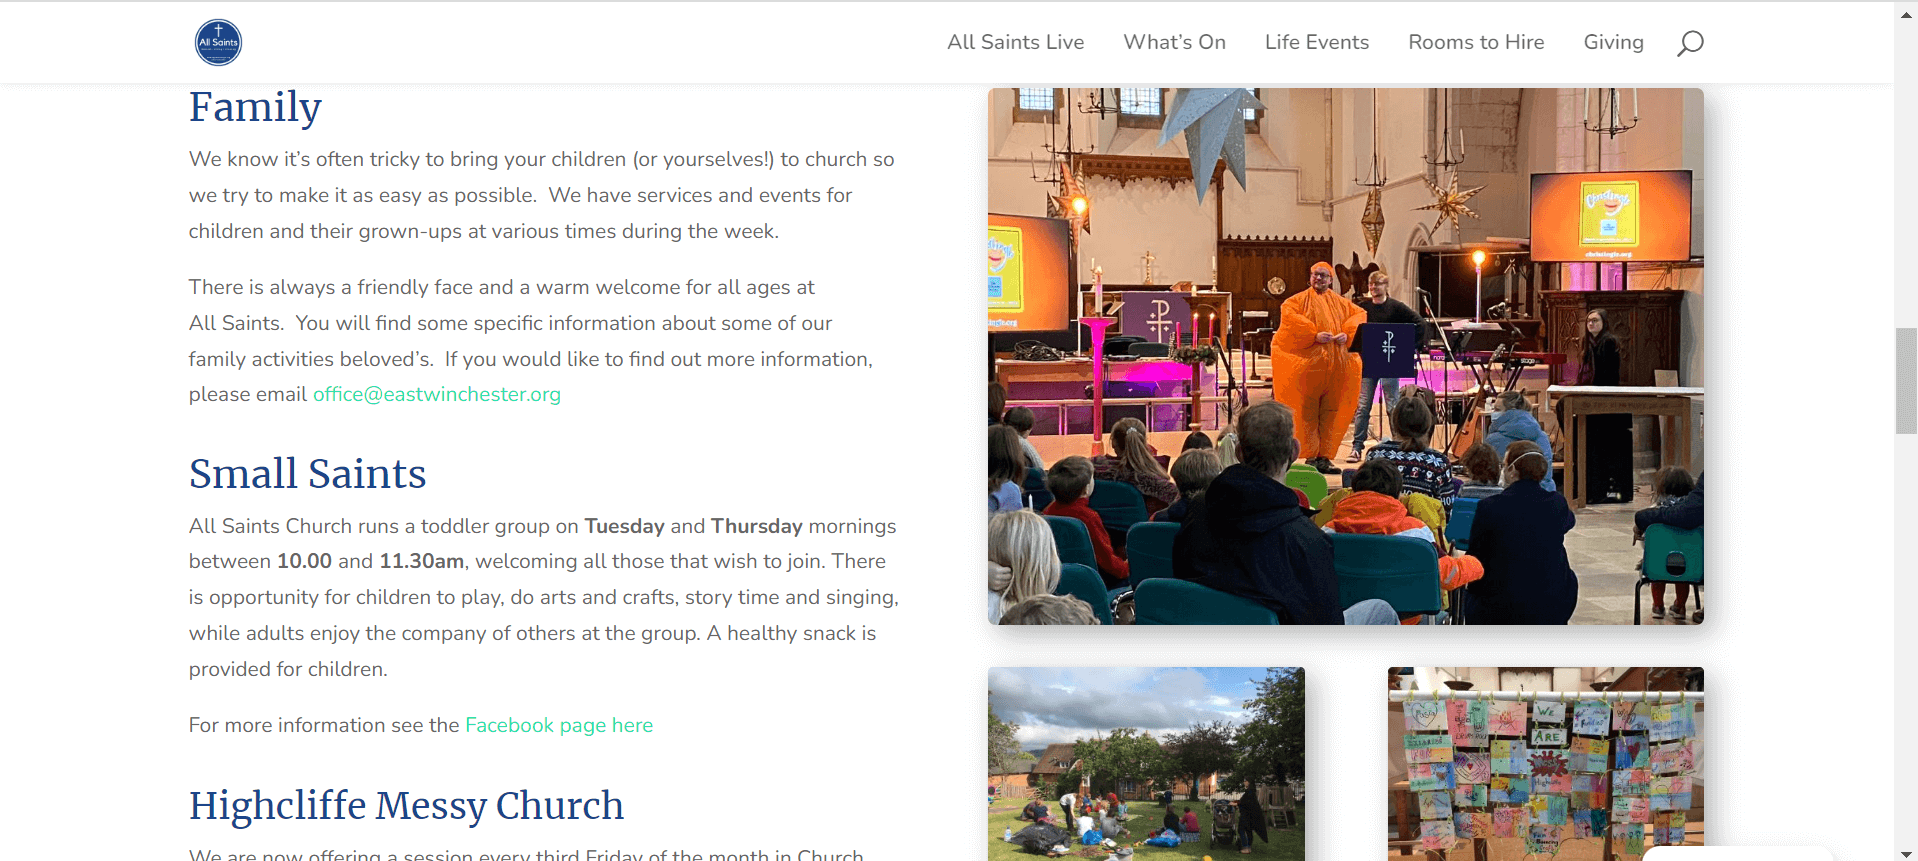 The new All Saints site uses authentic imagery to reflect the church